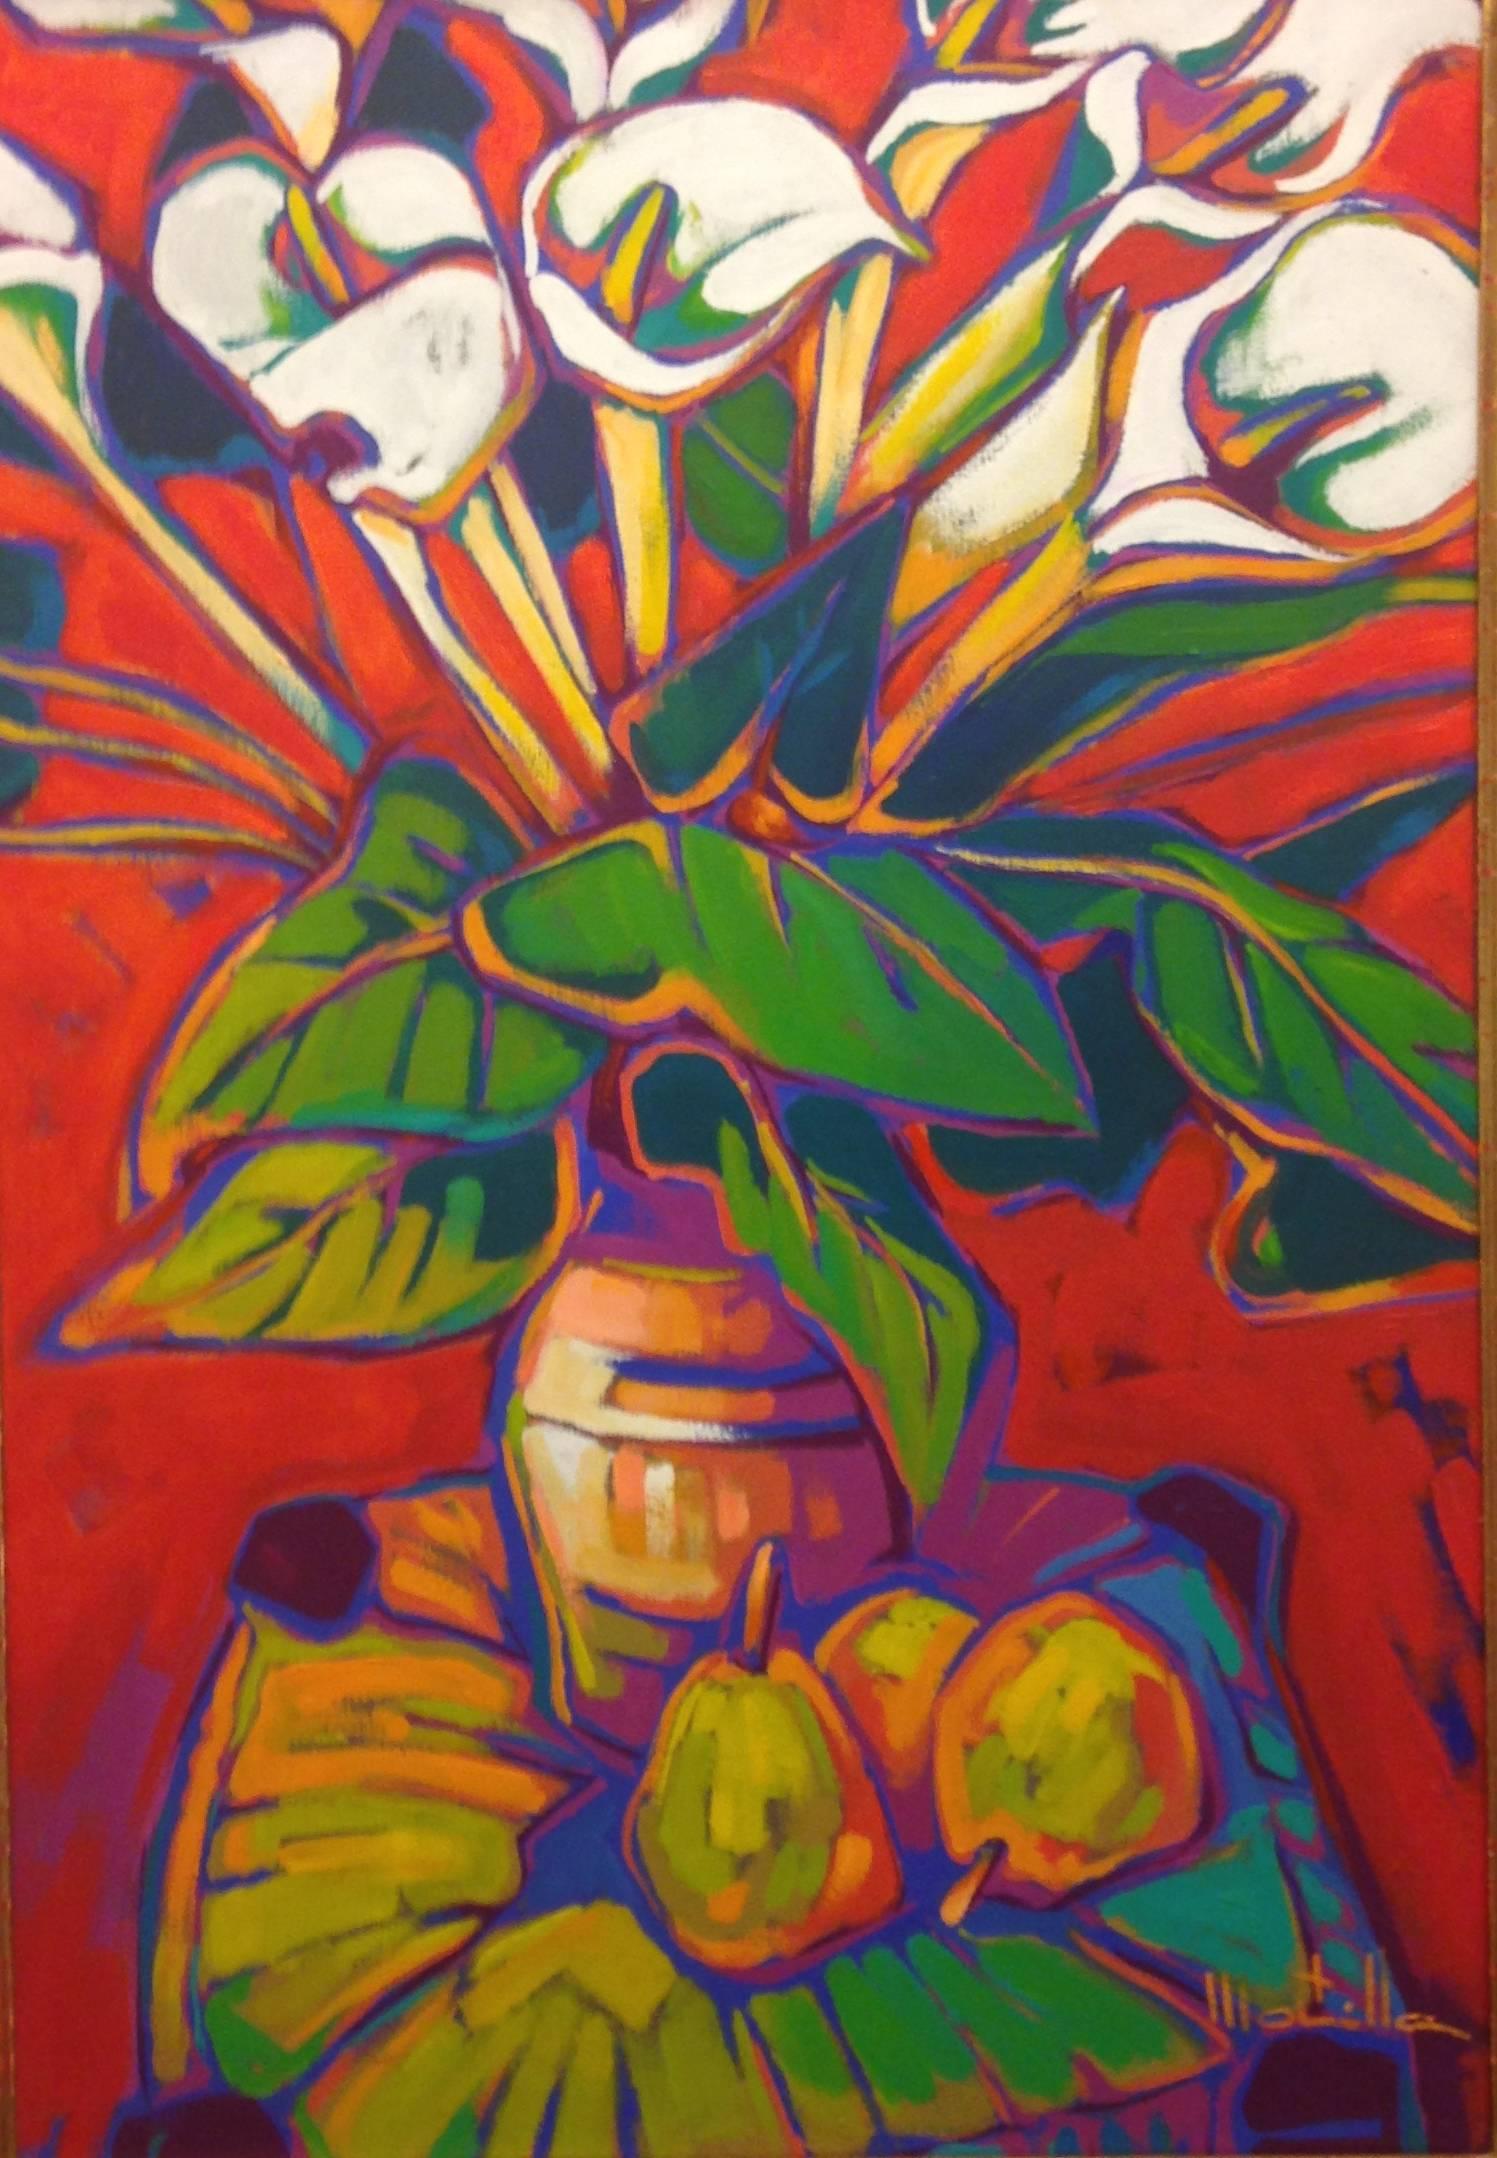 Chico Montilla Figurative Painting - "Three pears". Montilla Oil on Linen Expressionist bouquet of flowers and fruit.